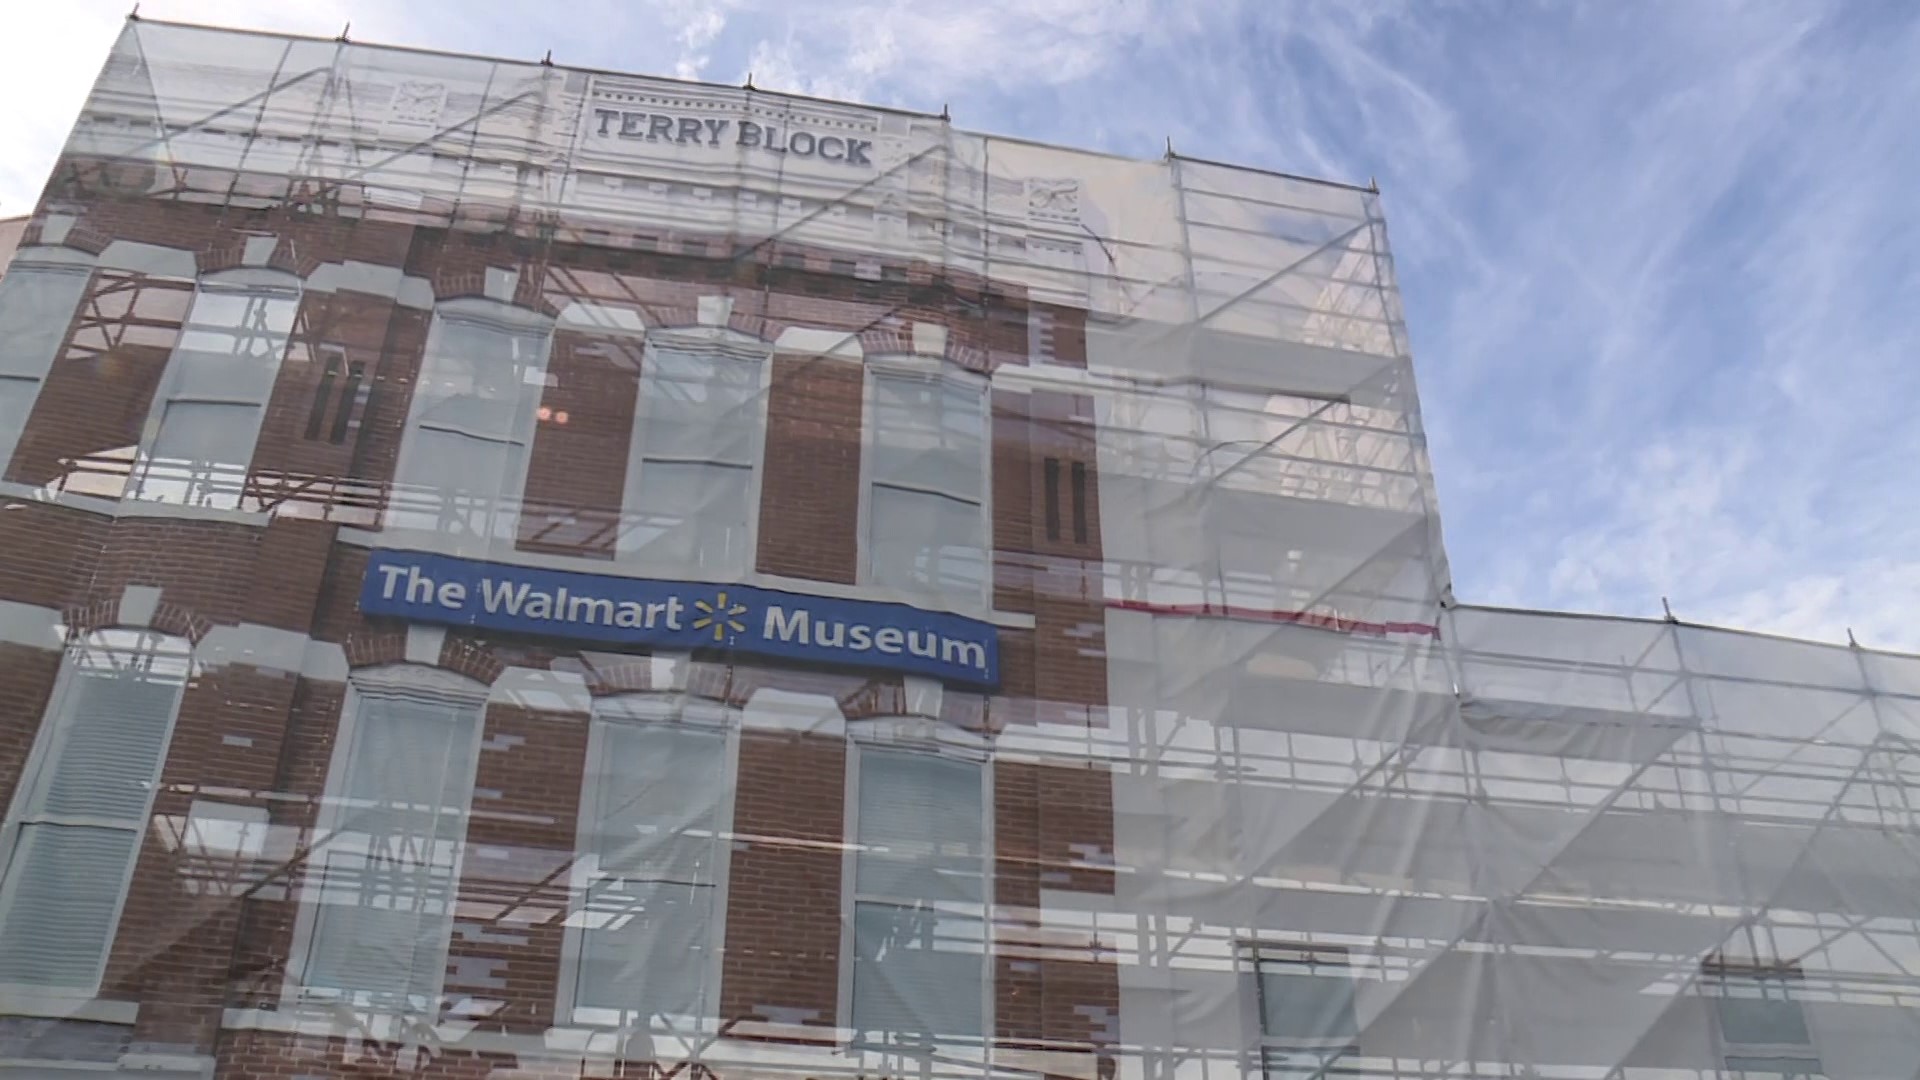 Walmart says the demolition and rebuilding of the historic buildings that house its museum was necessary to meet safety and structural requirements.